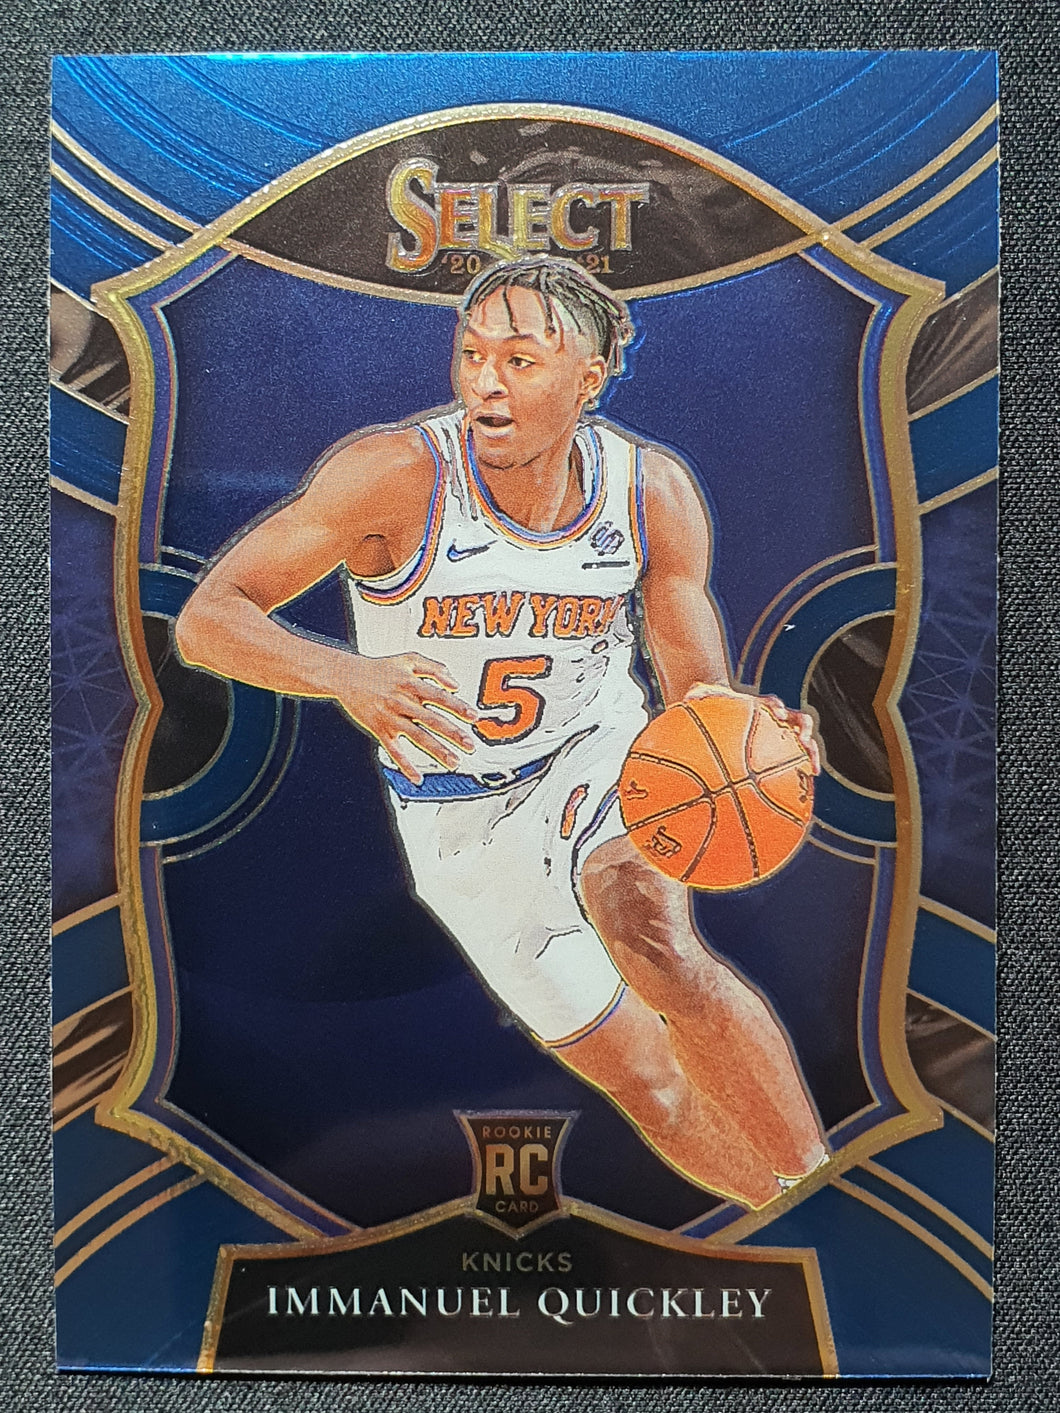 2020-21 Panini Select Immanuel Quickley Blue Rookie RC